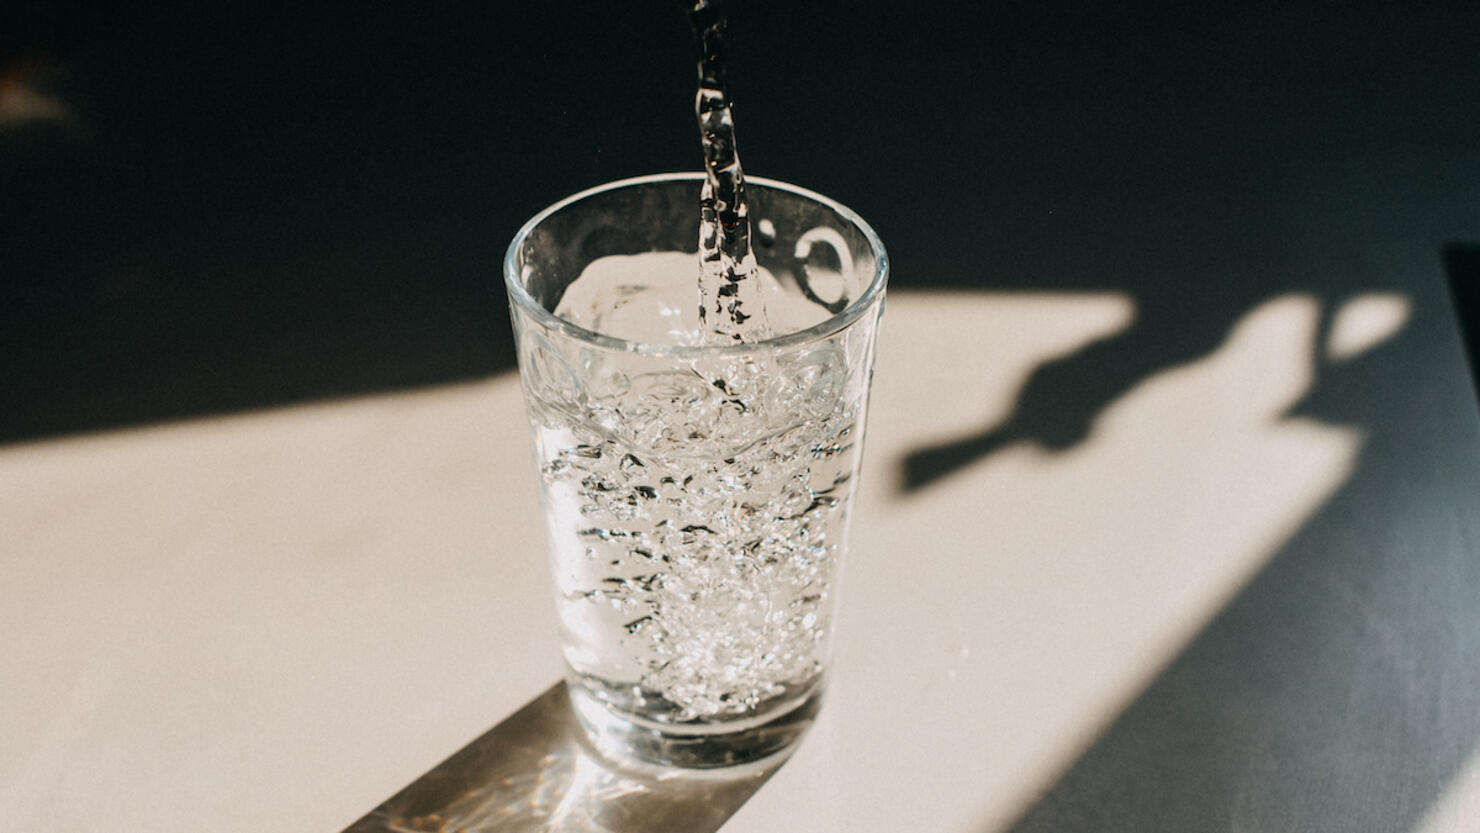 Water being poured in a glass of water that cast a beautiful shadow on a white kitchen countertop